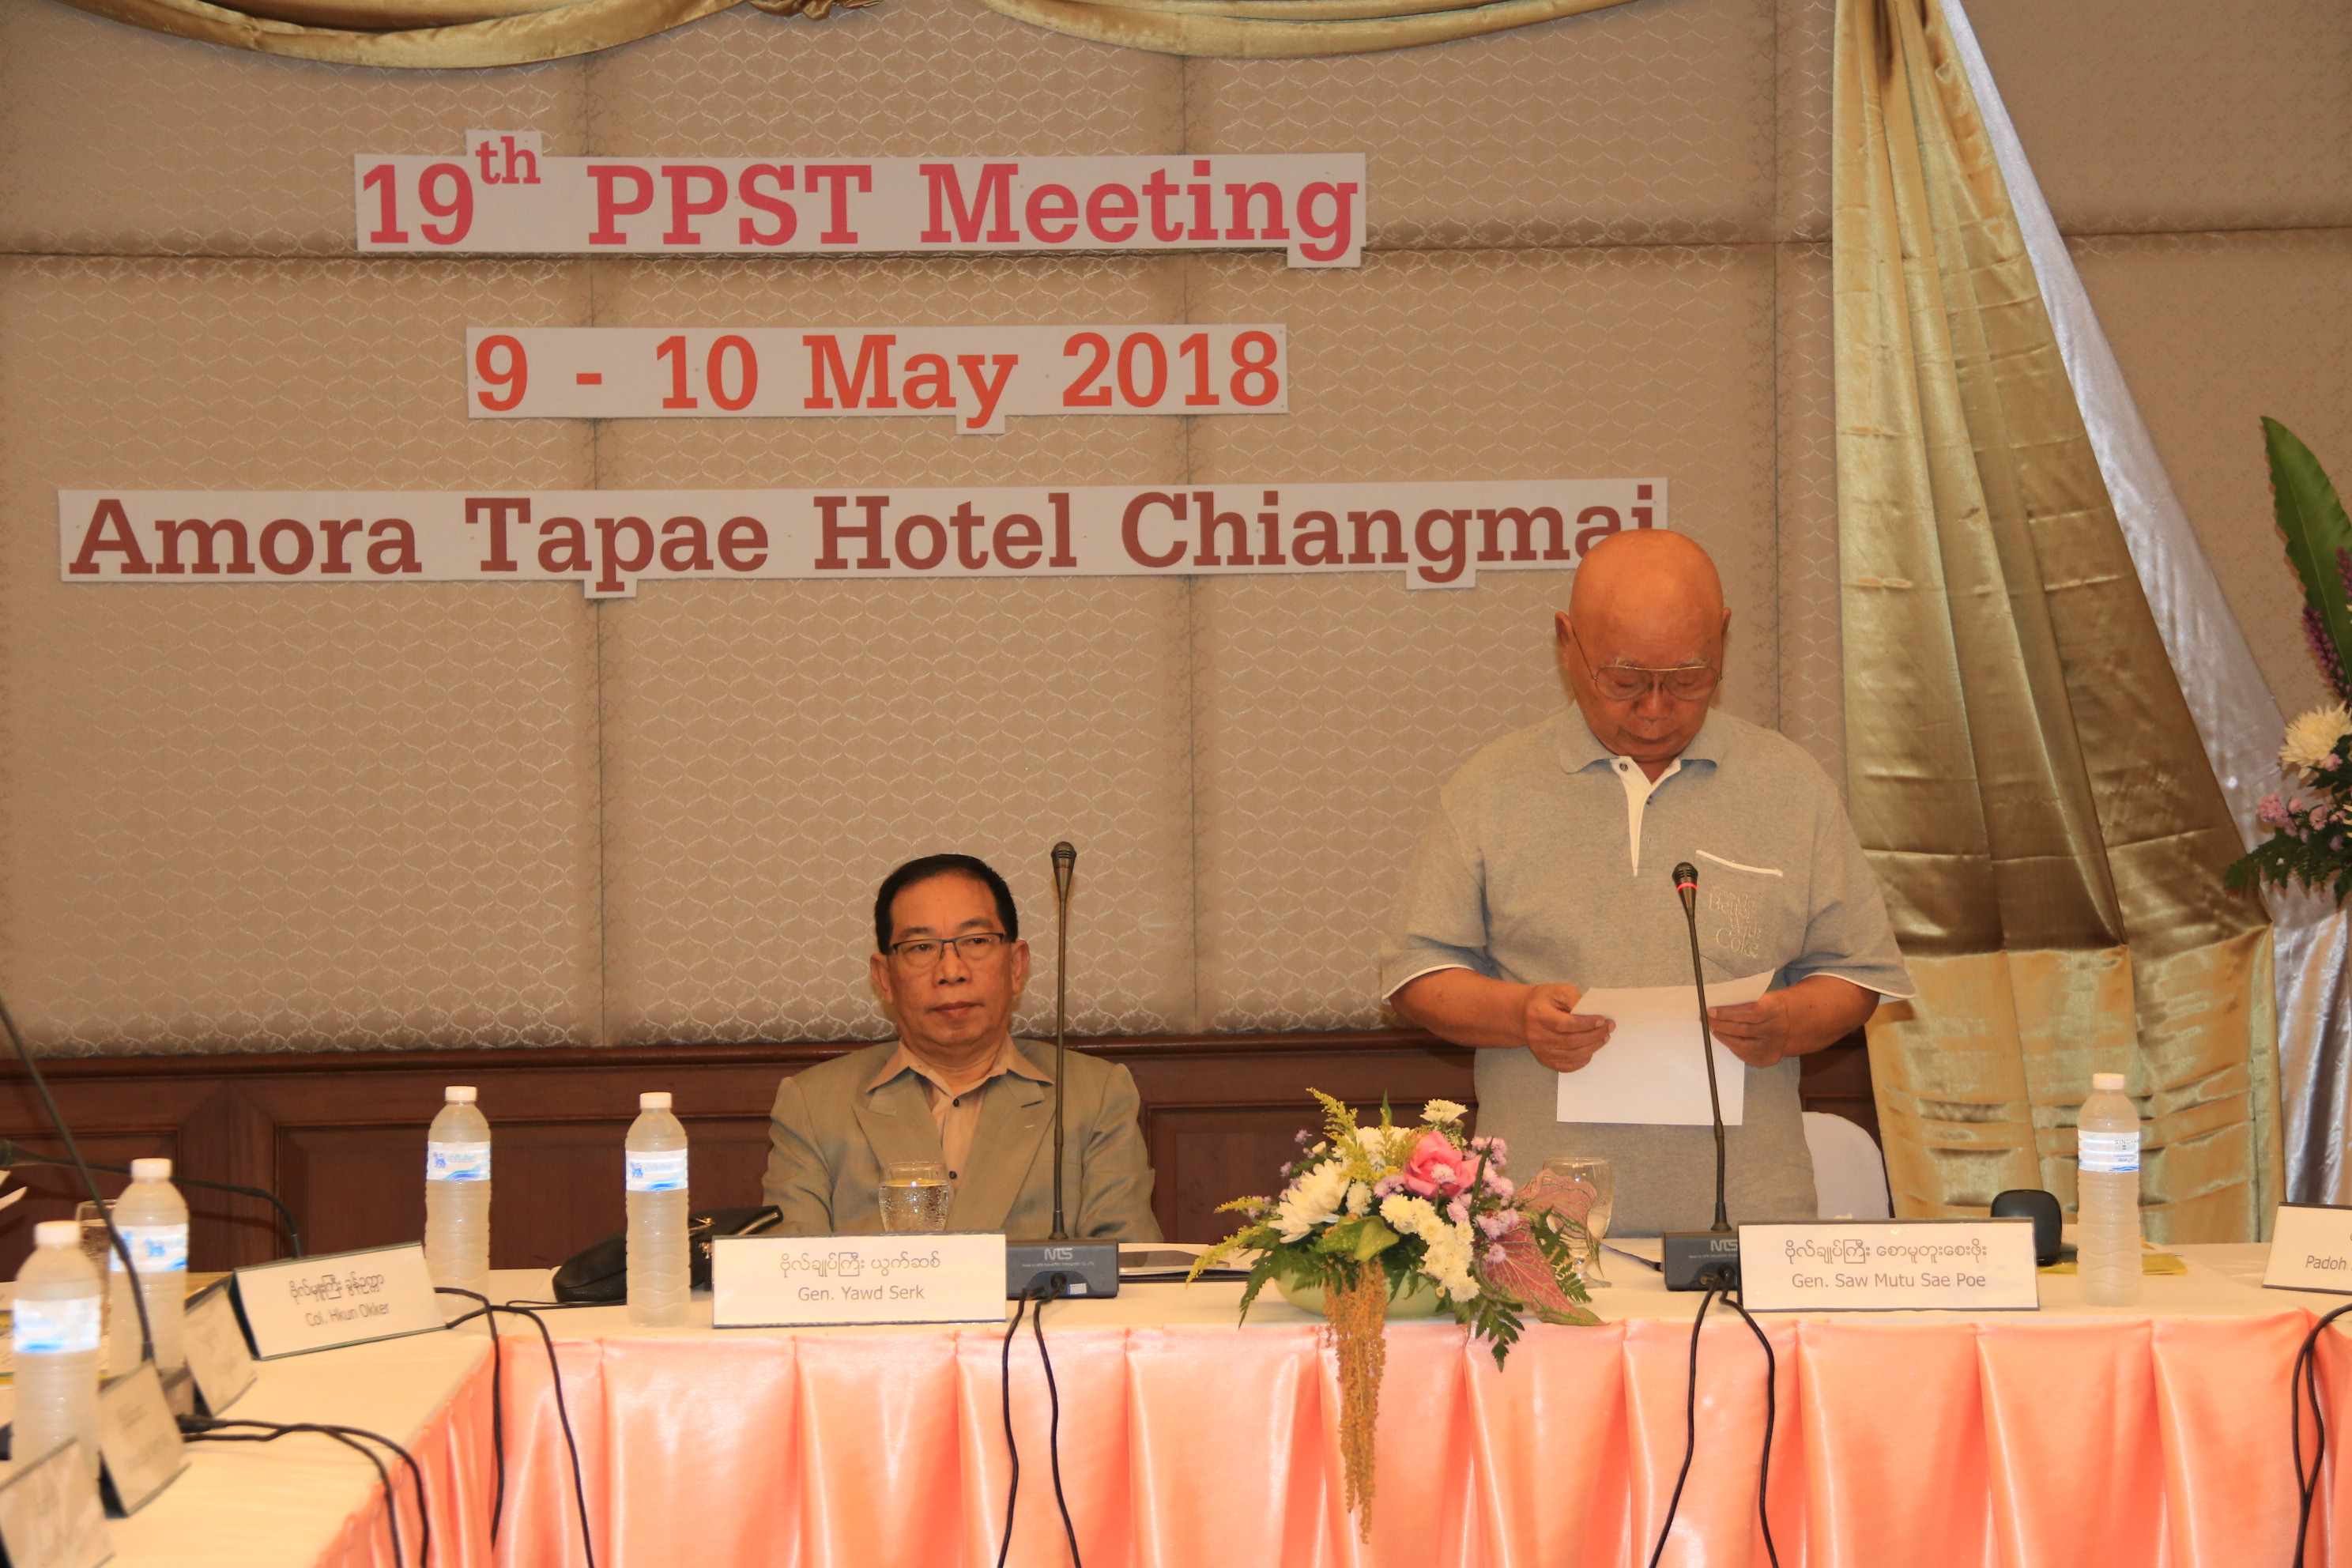 The Opening Remarks by General Saw Mutu Sae Poe at the 19th PPST Meeting